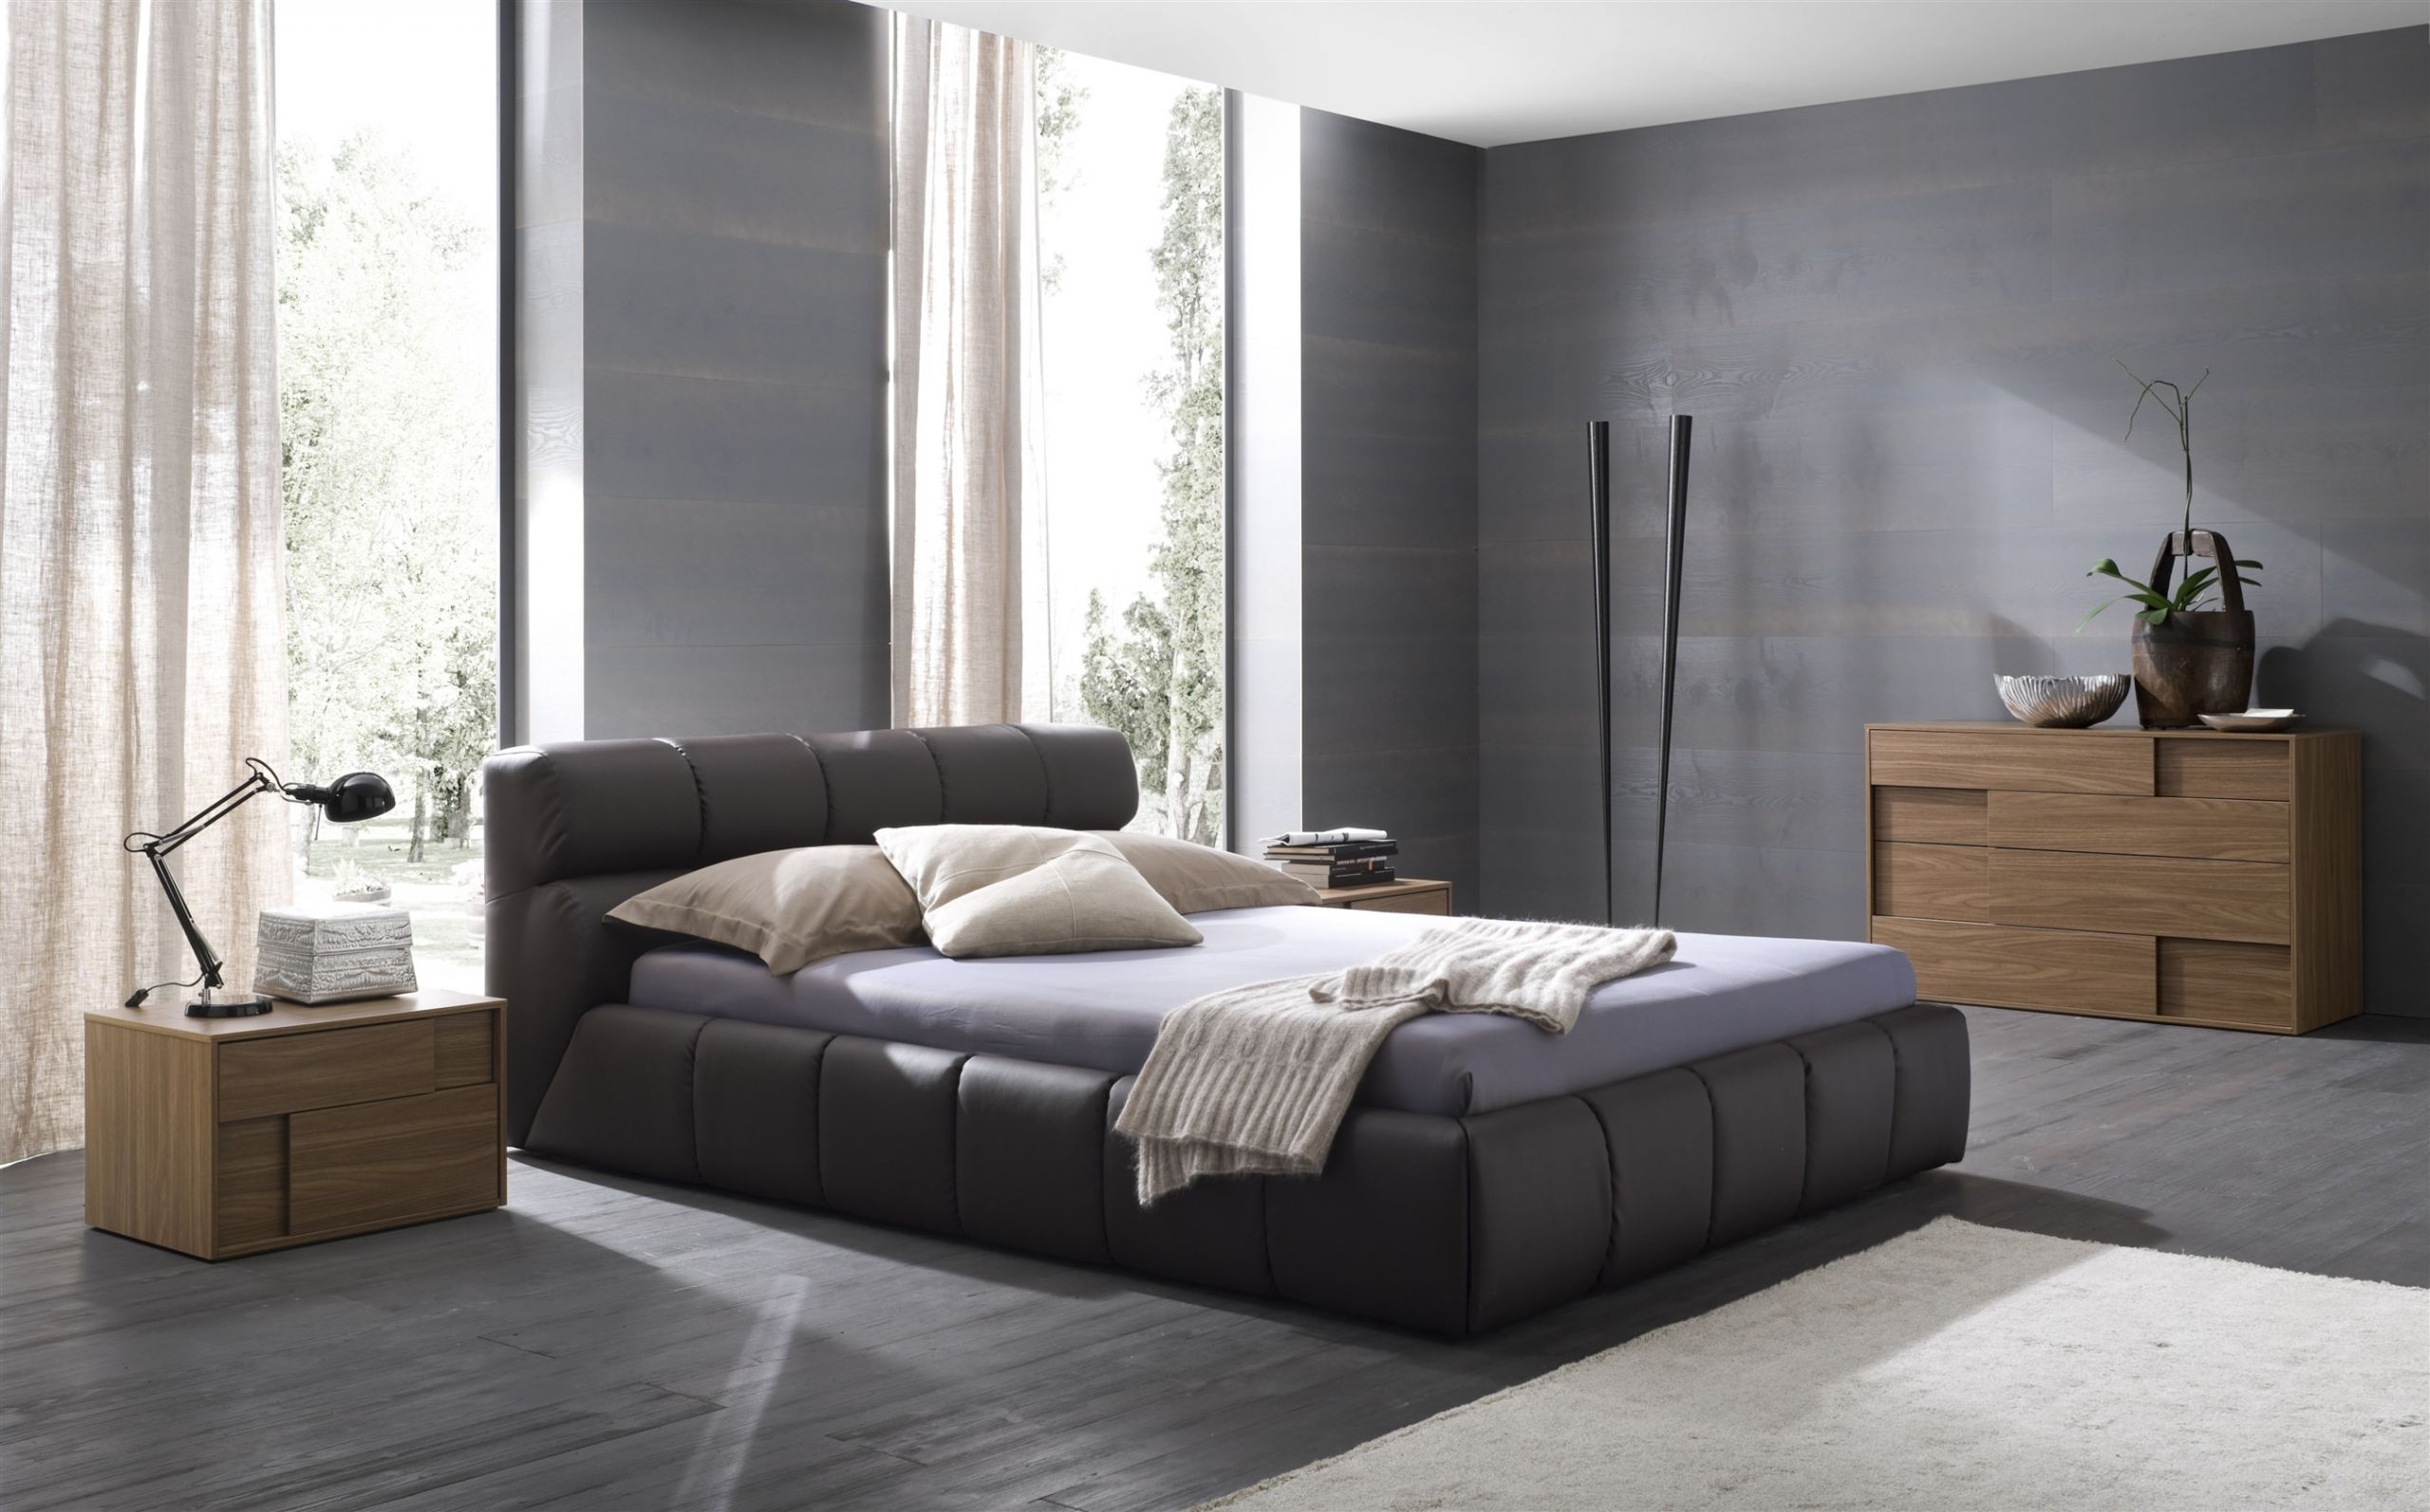 Modern Grey Bedroom
 40 Modern Bedroom For Your Home – The WoW Style